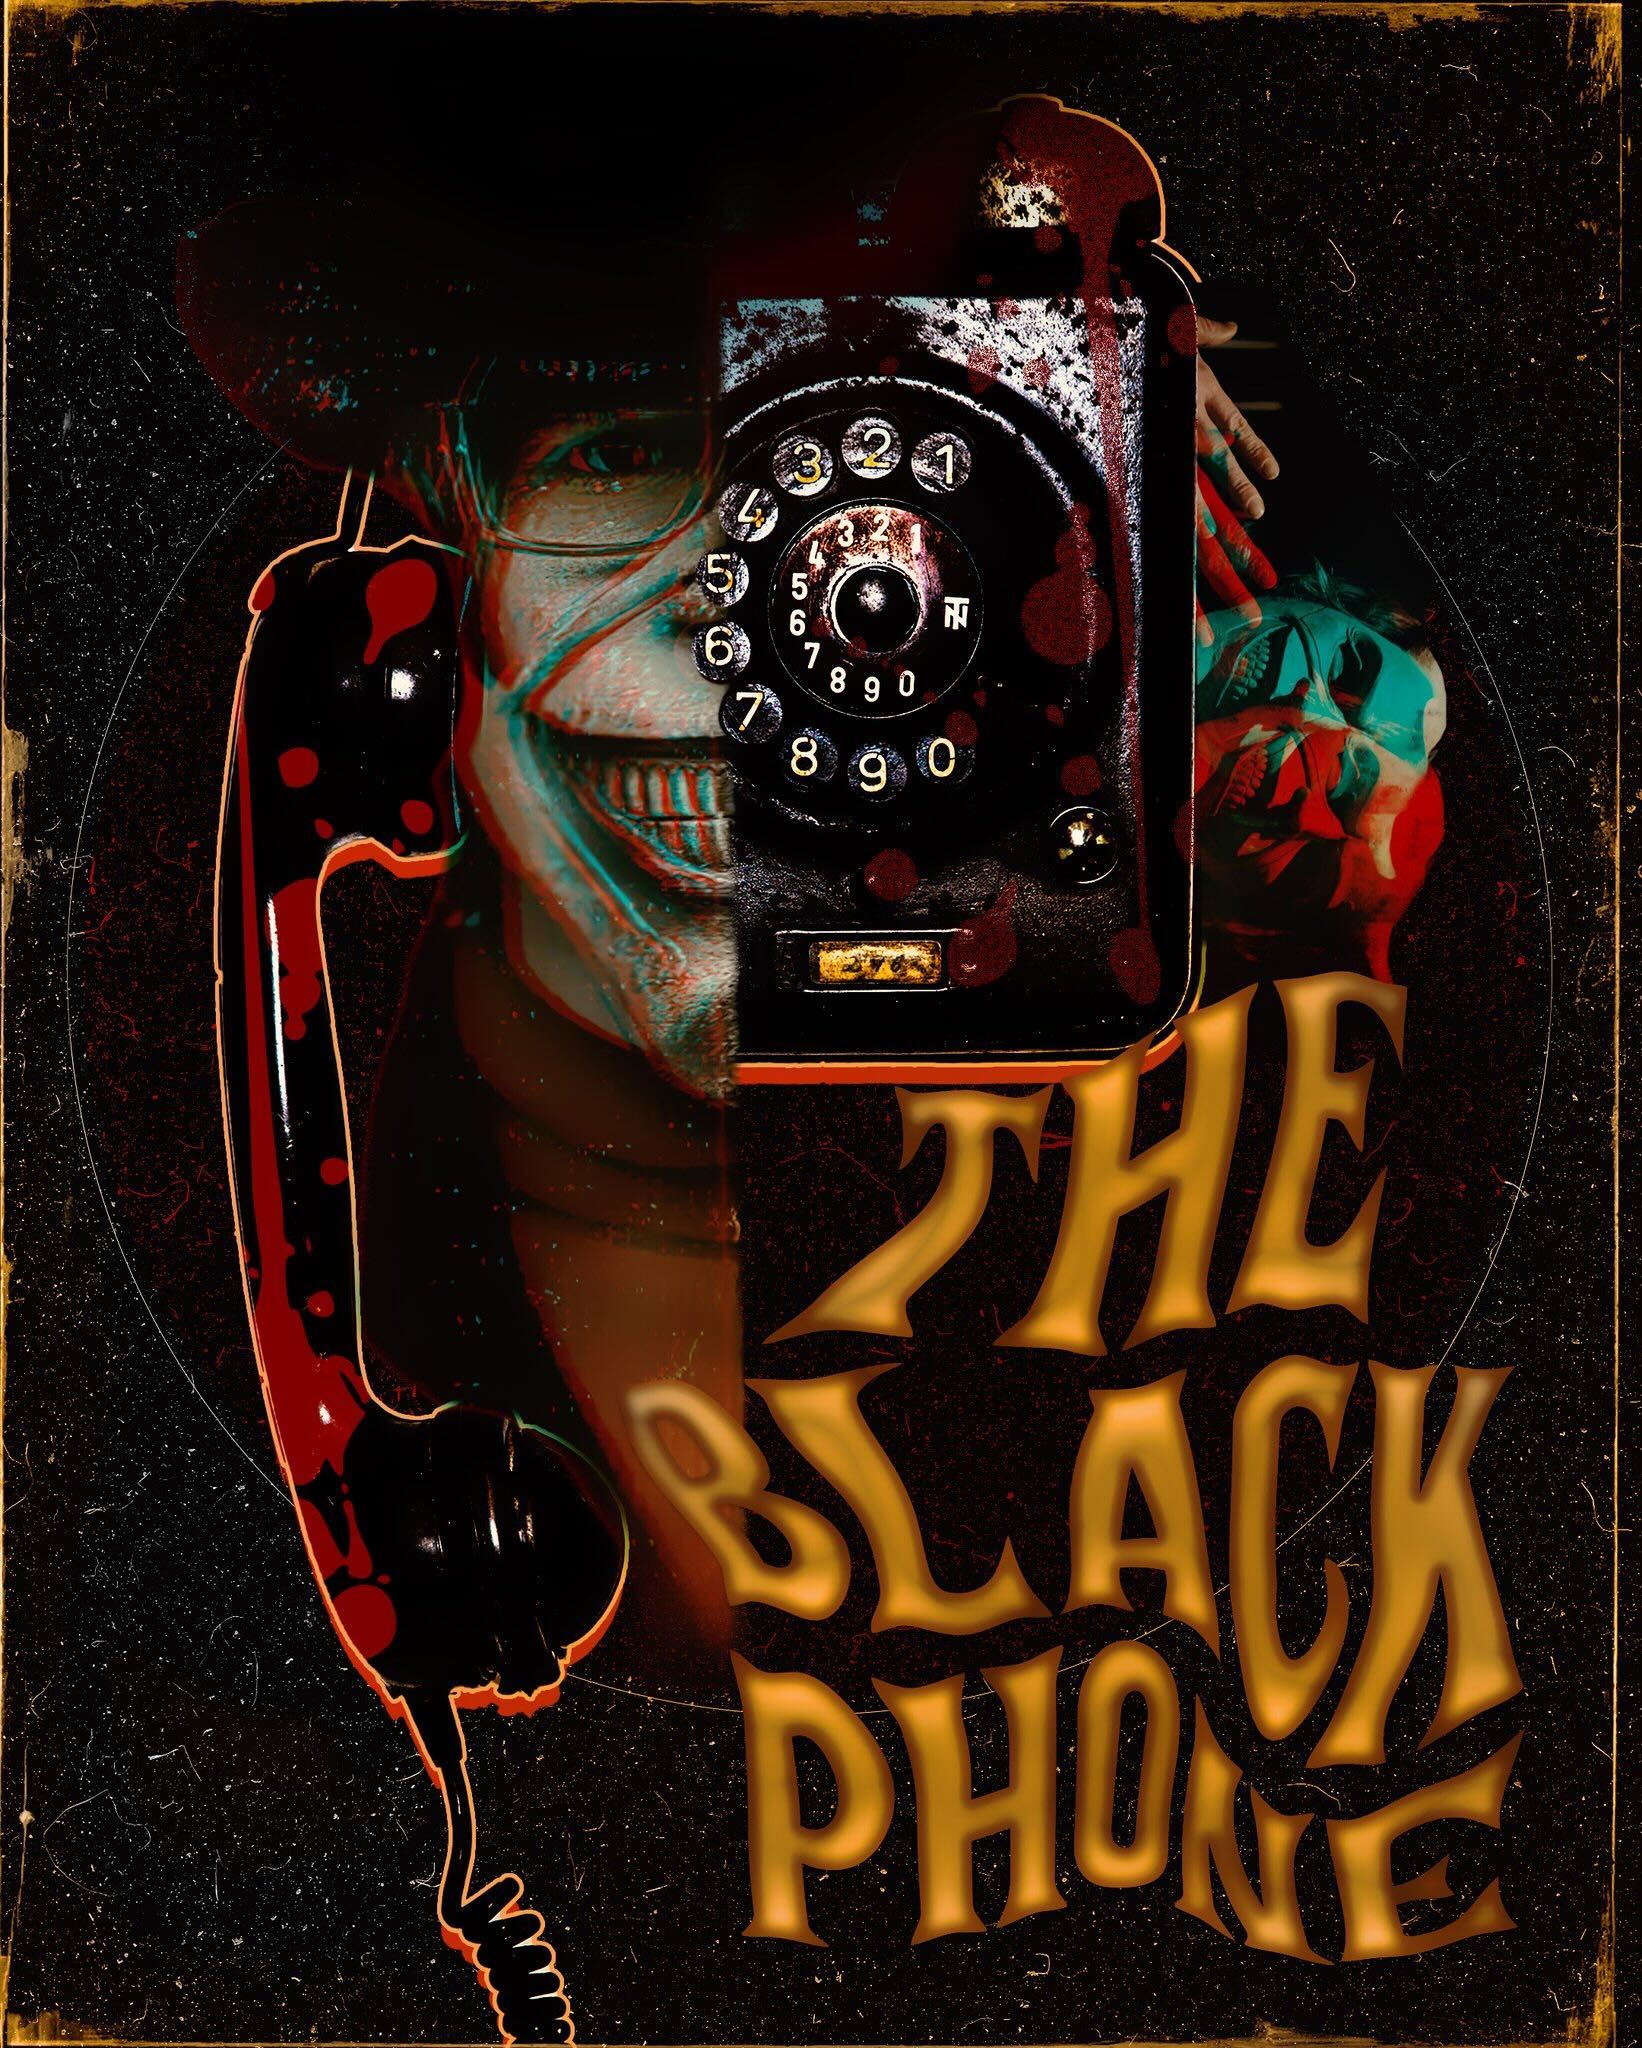 Universal art of terror. Check out this #TheBlackPhone fan art and get tickets to see it only in theaters TONIGHT